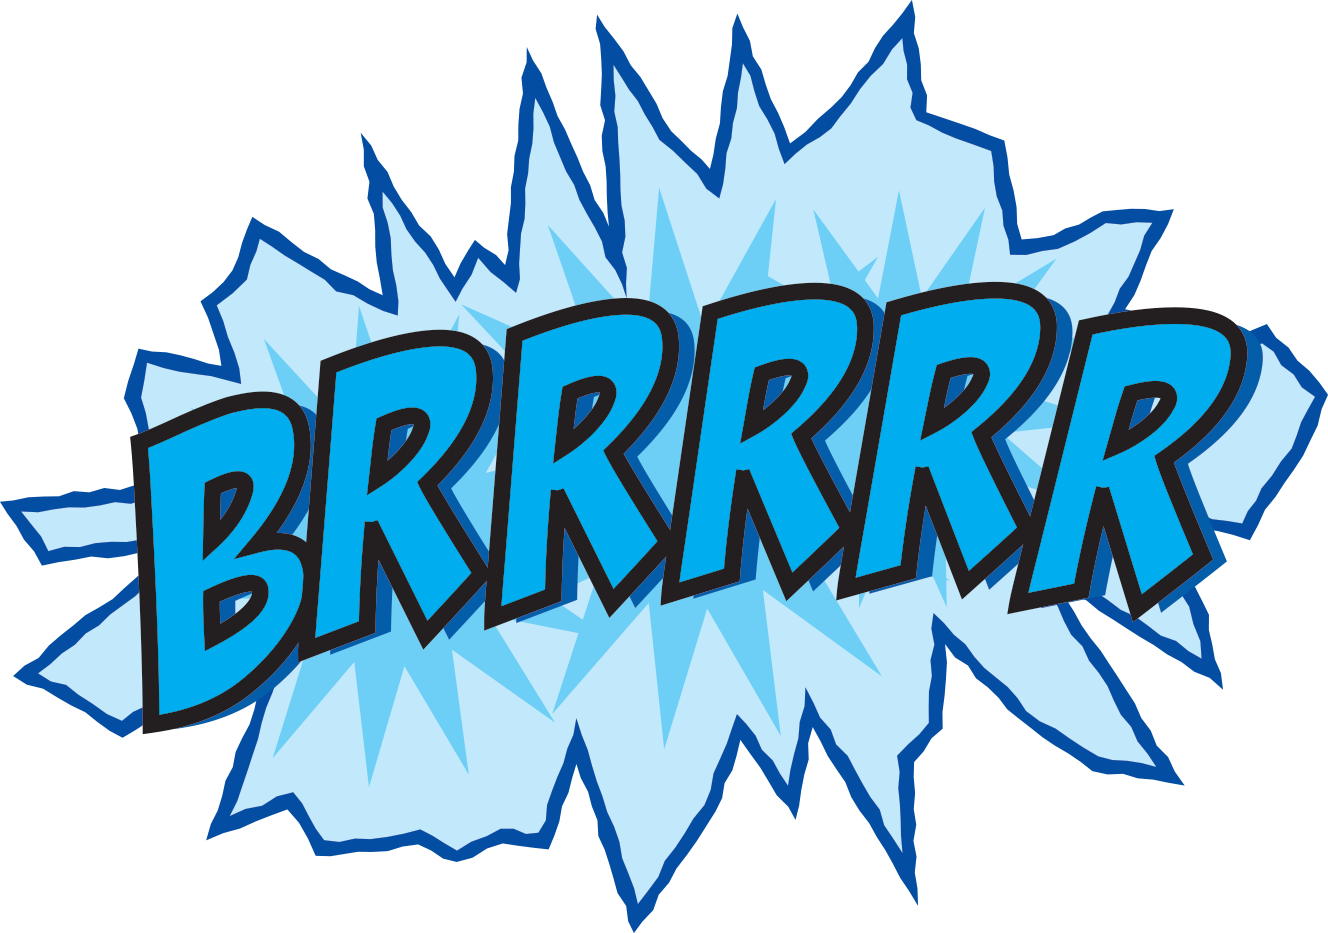 person freezing clipart